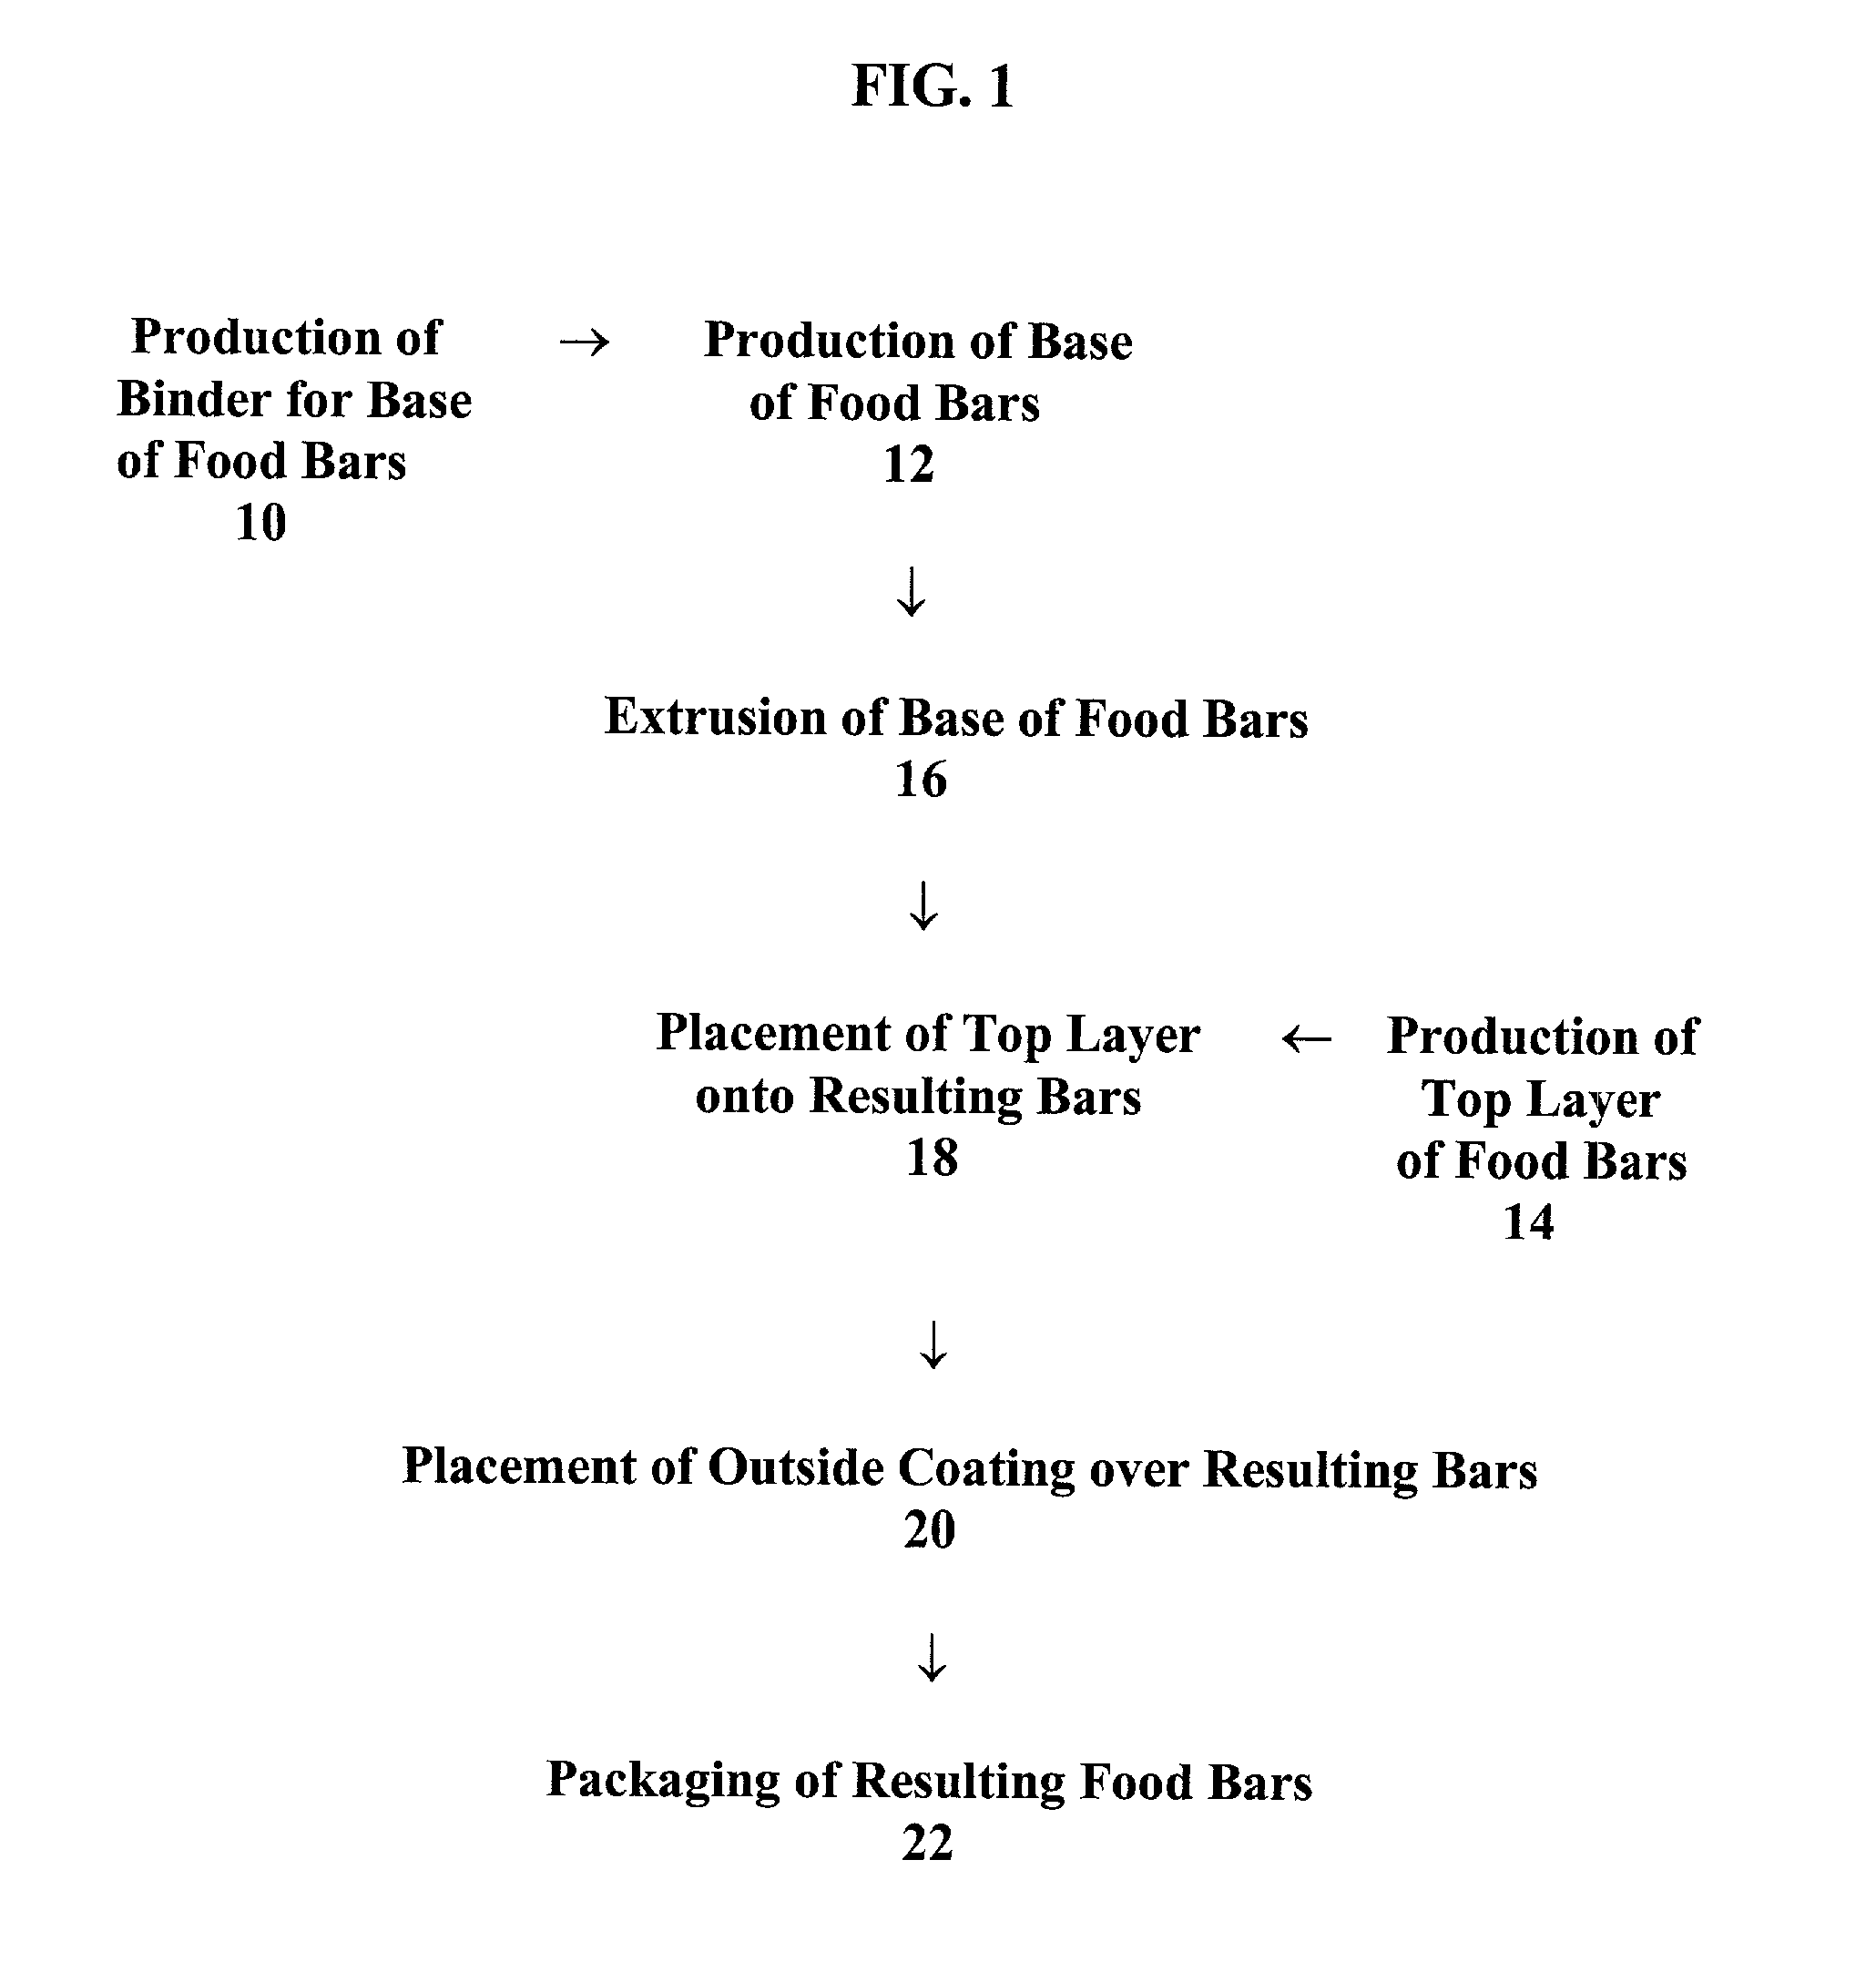 Food bars containing nutritional supplements and Anti-constipation and regularity -maintaining agents